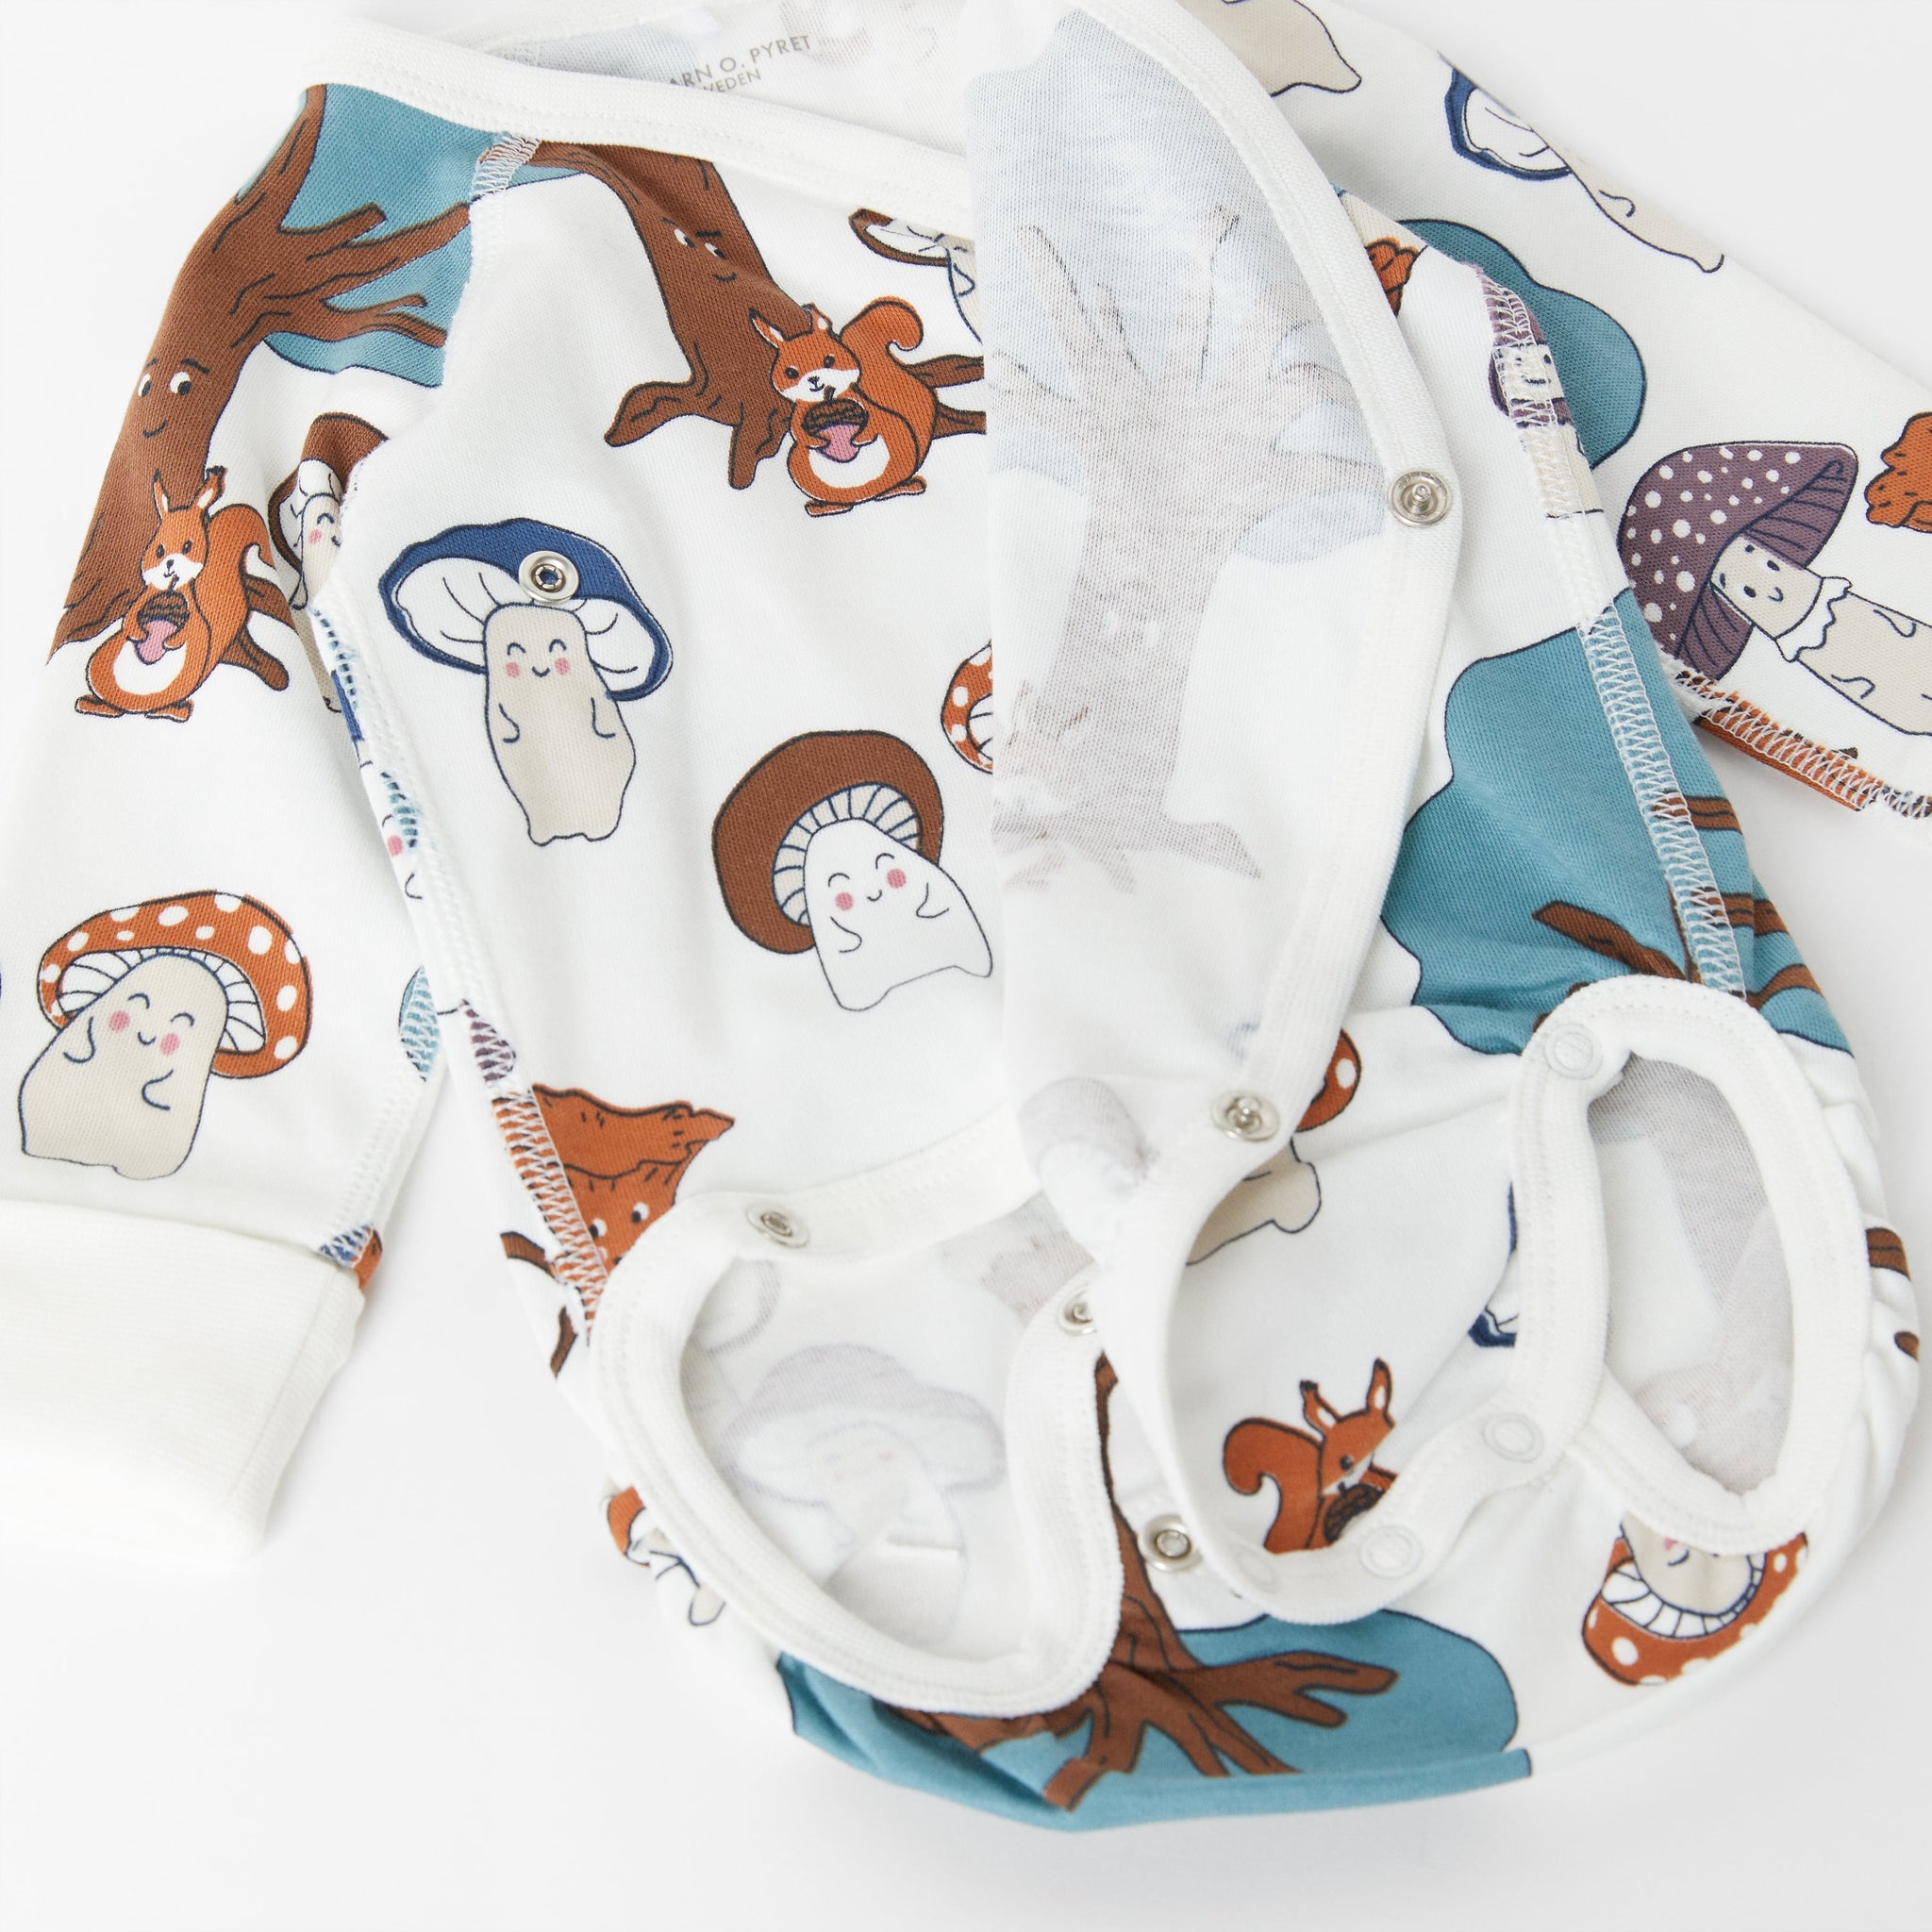 White Cotton Wraparound Babygrow from the Polarn O. Pyret babywear collection. The best ethical baby clothes